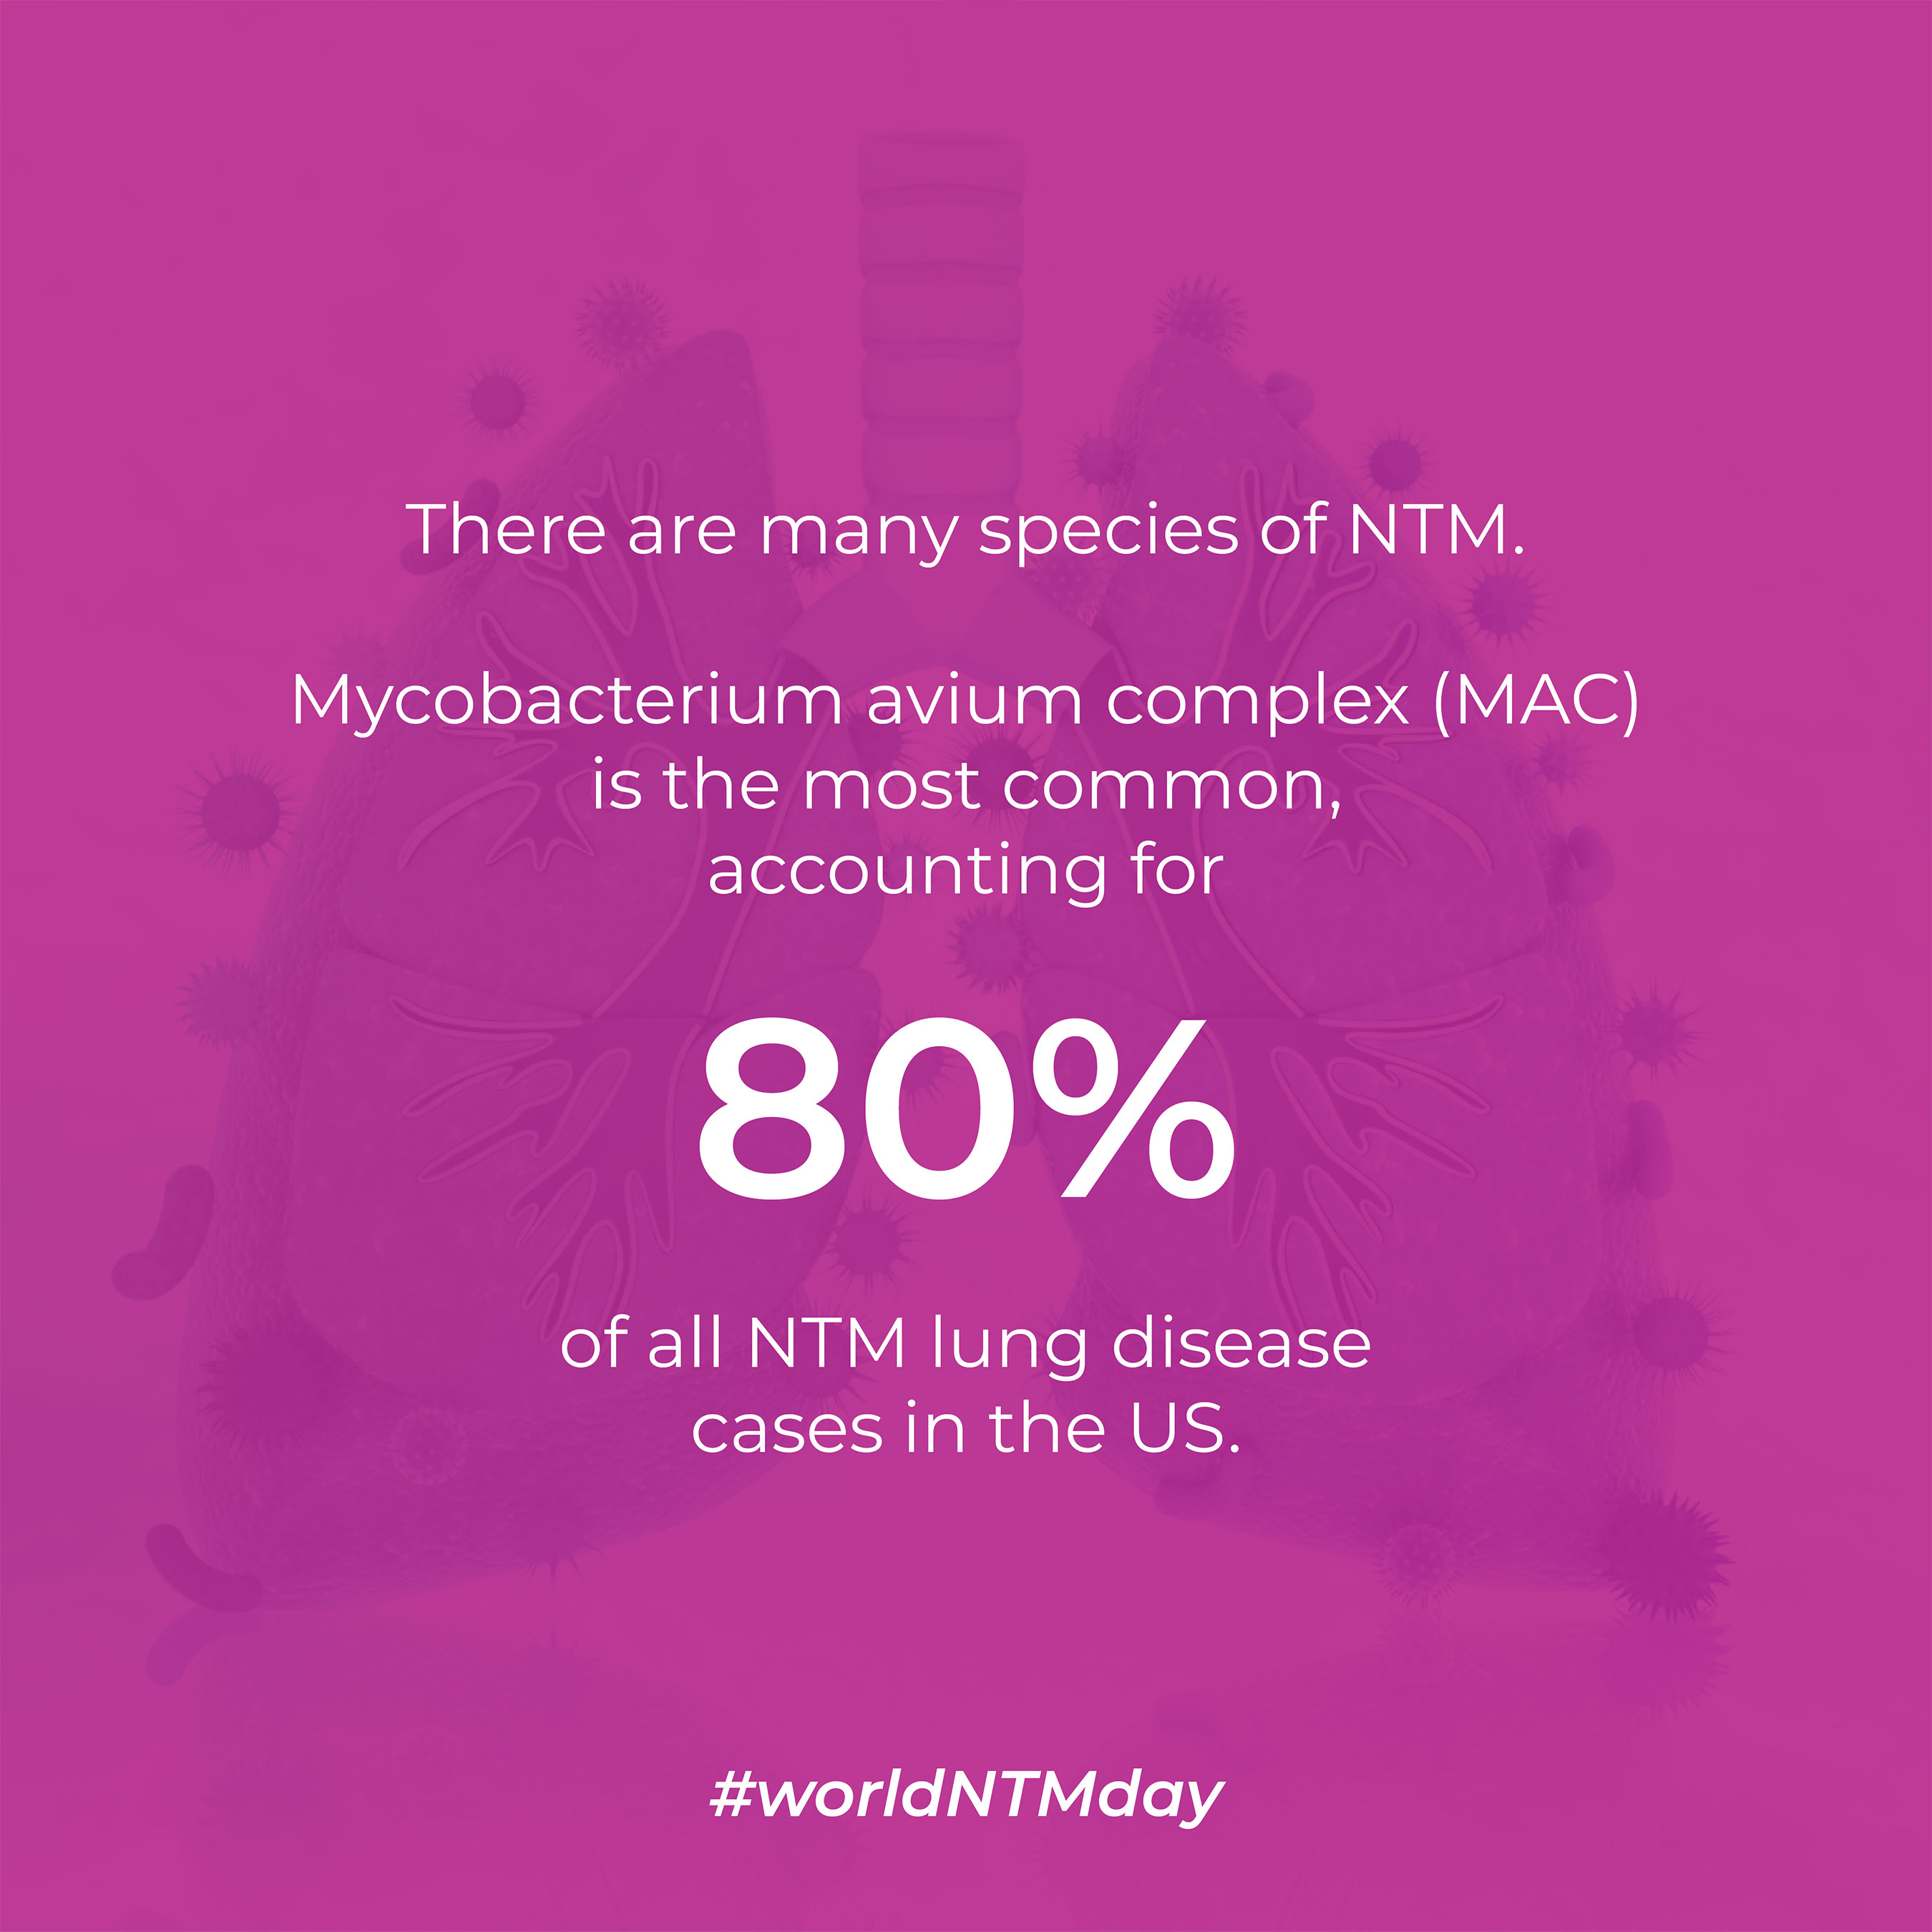 It's time to shine a light on nontuberculous mycobacterial (NTM) disease and its impact on respiratory health. Let's spread awareness about NTM infections, encourage early detection, and support individuals living with NTM. Together, we can create a brighter future. Visit https://worldntmday.org for more info on NTM #NTMAwareness #FightNTM #worldntmday